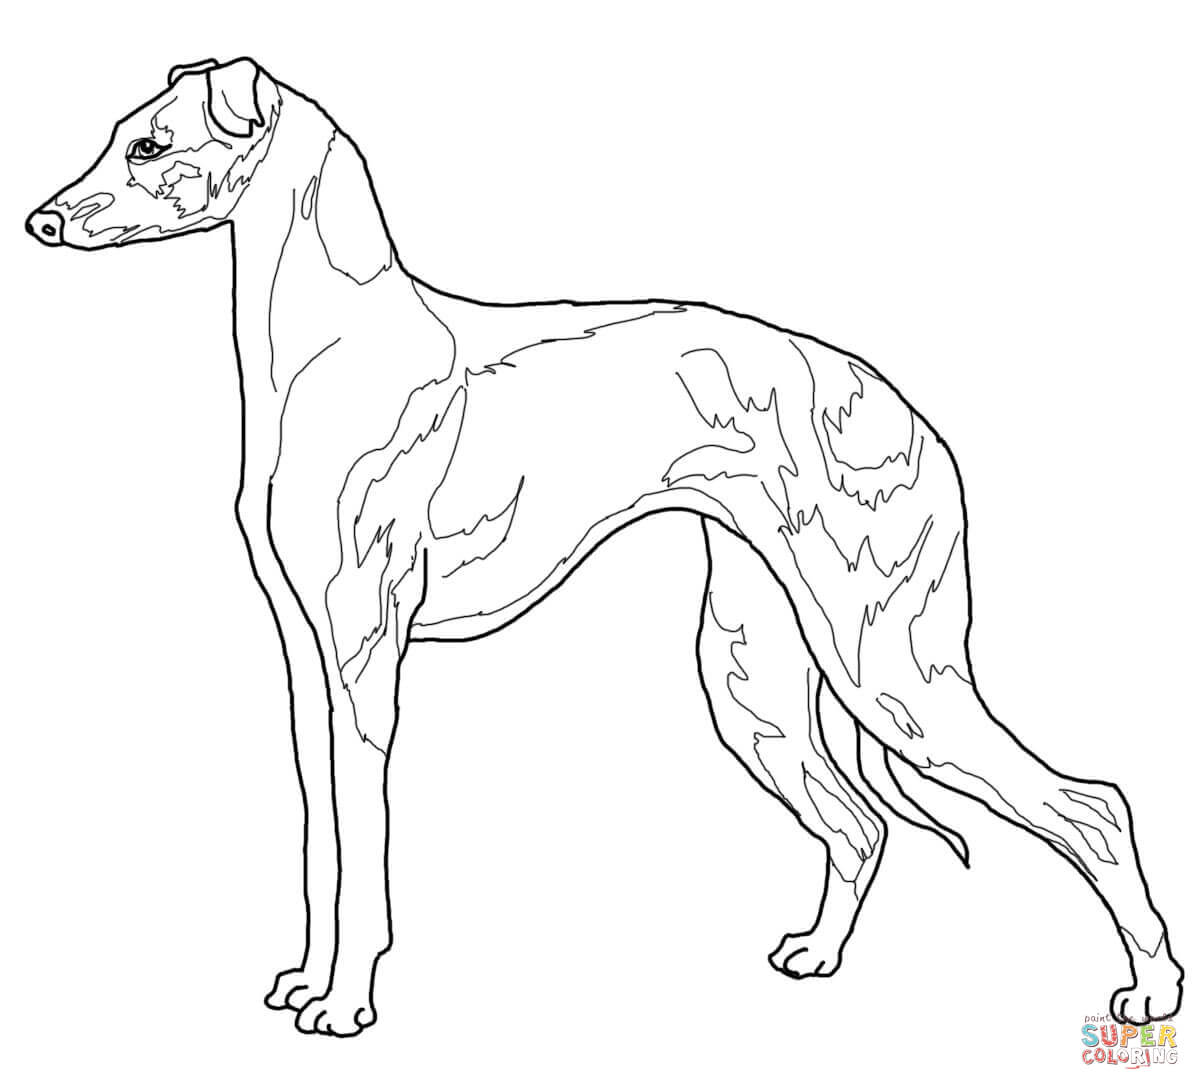 Greyhound coloring #16, Download drawings